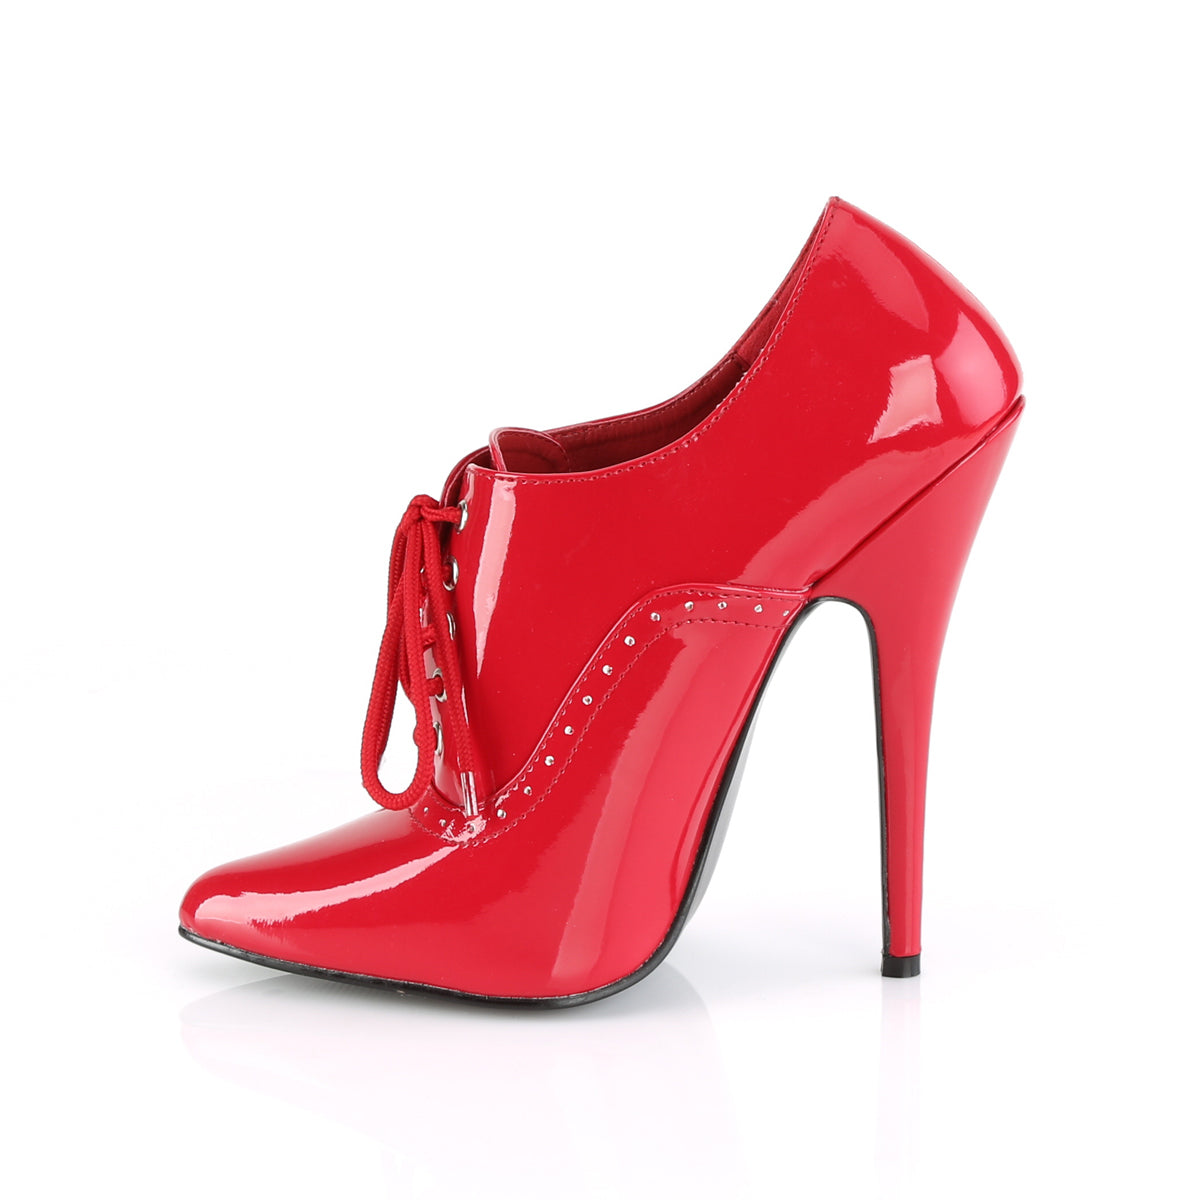 Devious Womens Pumps DOMINA-460 Red Pat